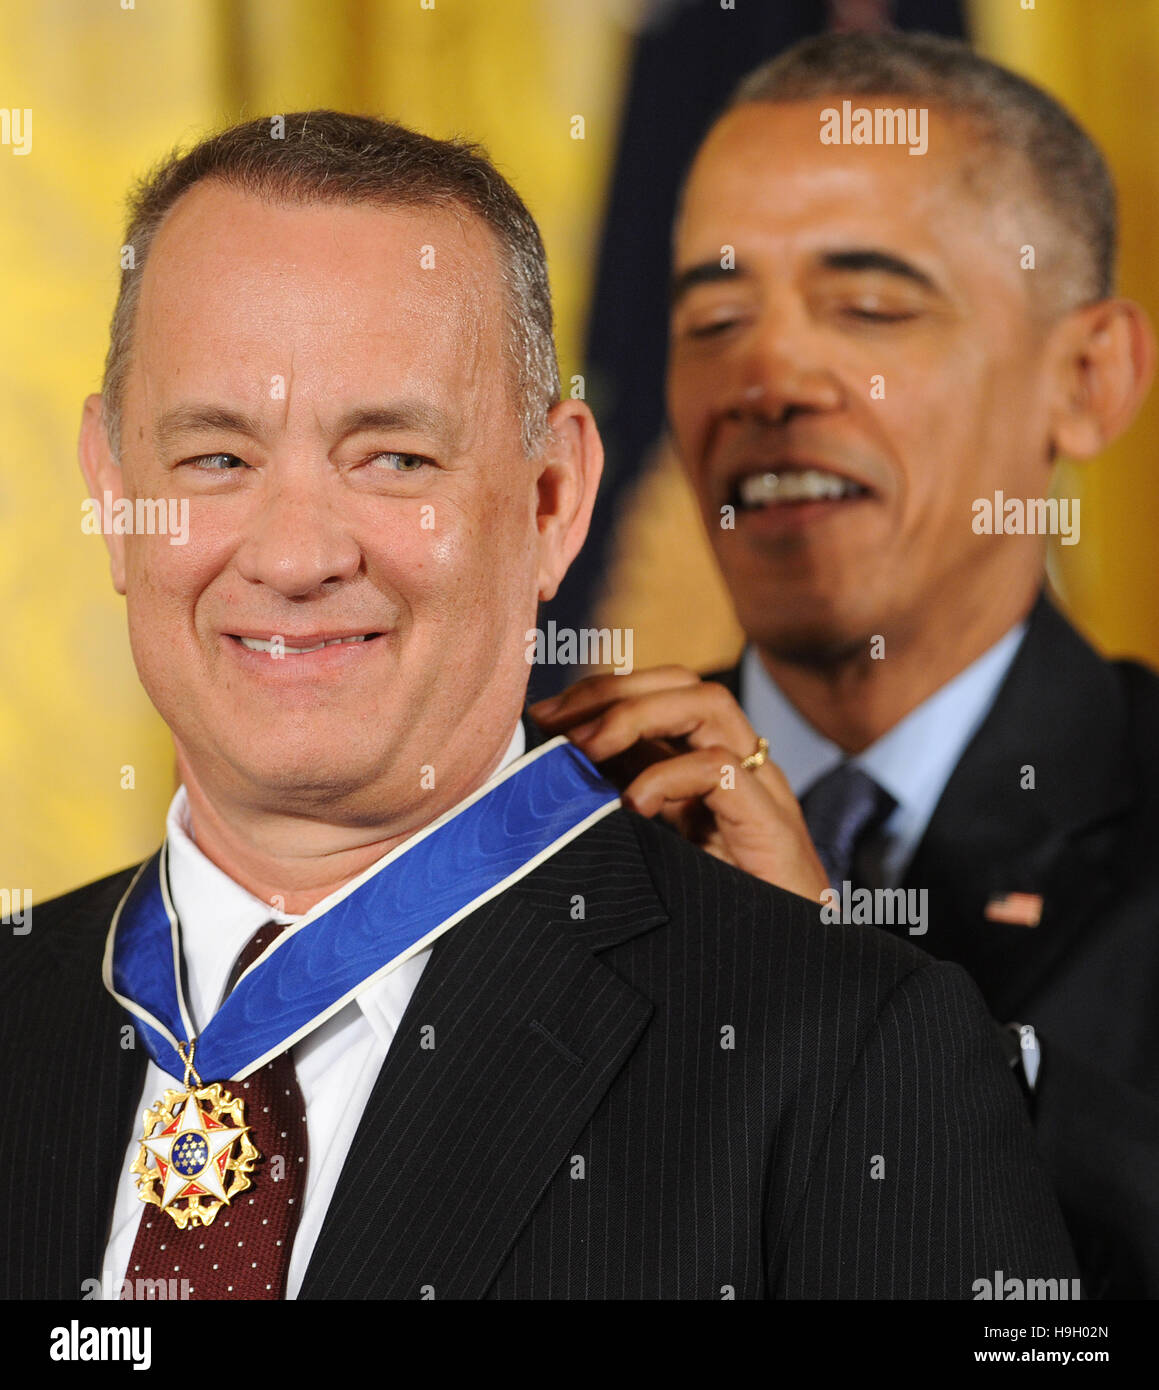 Washington, United States. 22nd Nov, 2016. U.S. President Barack Obama  presents the Presidential Medal of Freedom to Tom Hanks in a ceremony in  the East Room of the White House on November